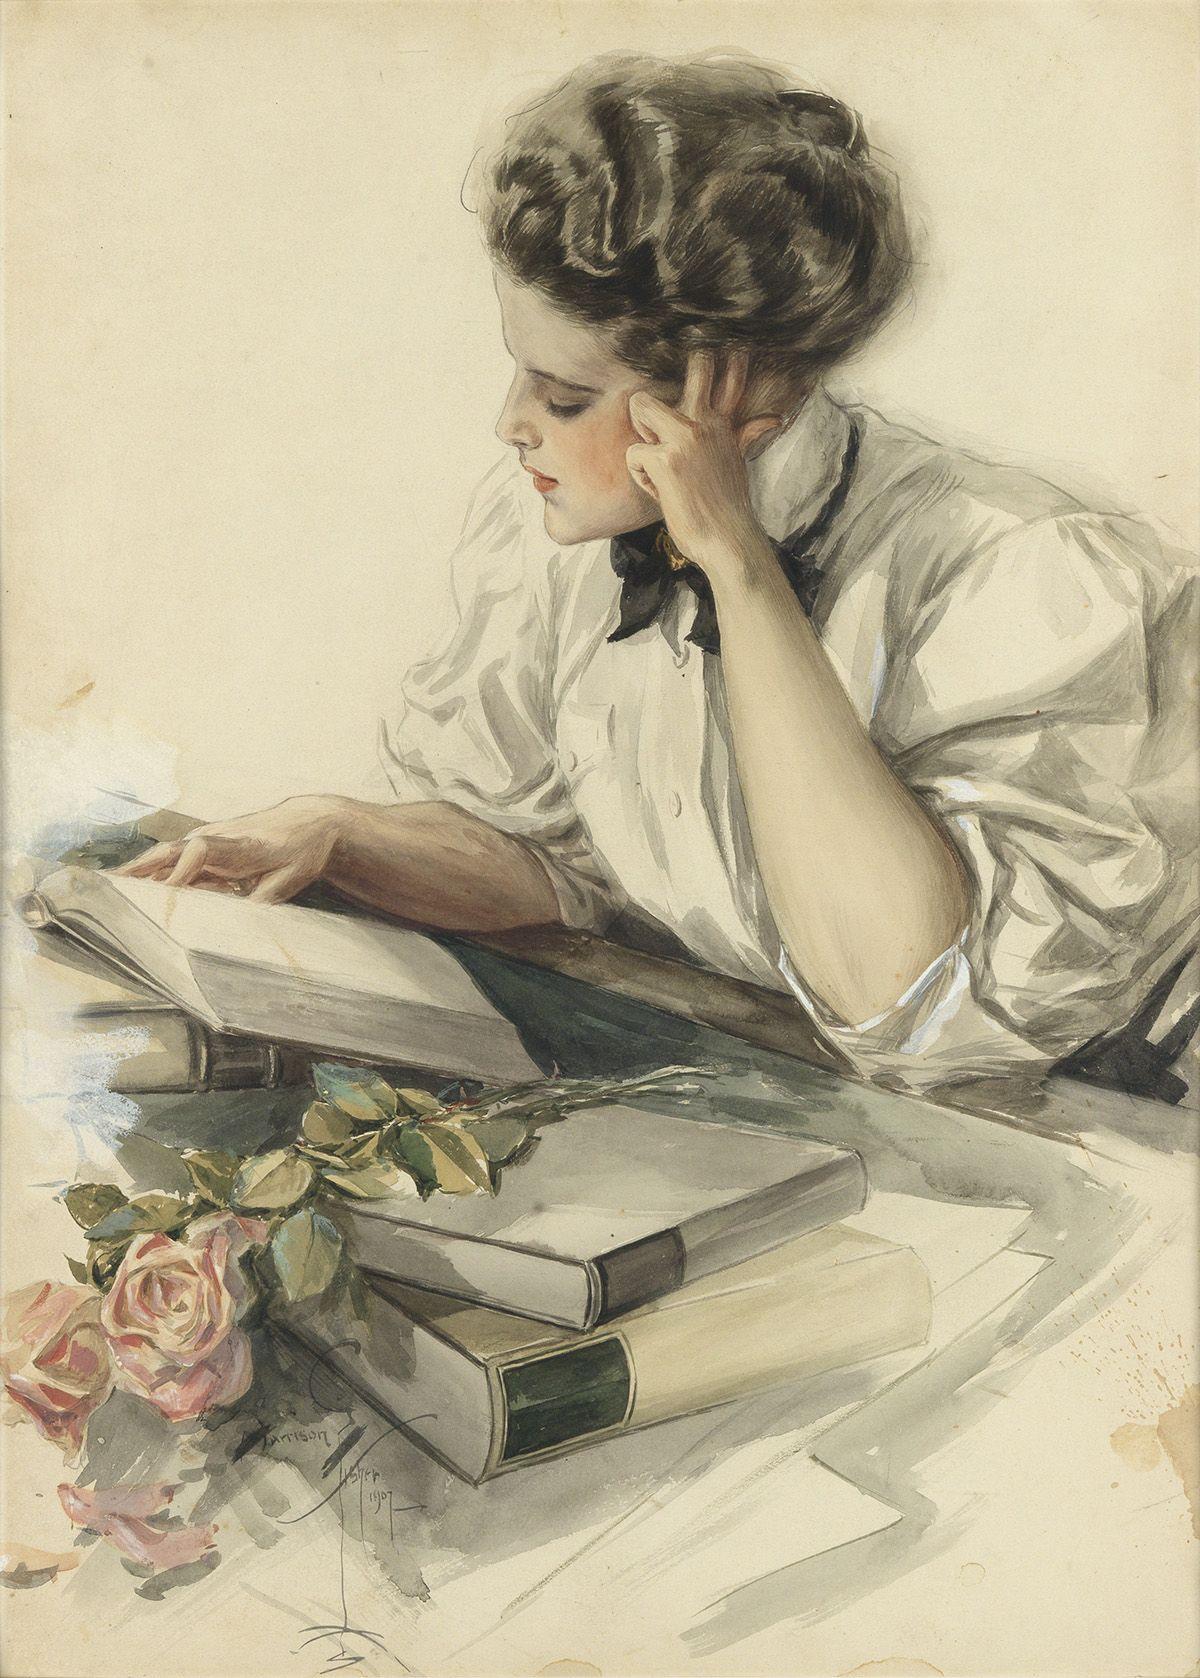 Harrison Fisher Portrait - "The Study Hour, " Illustration for The Ladies' Home Journal, April 1908